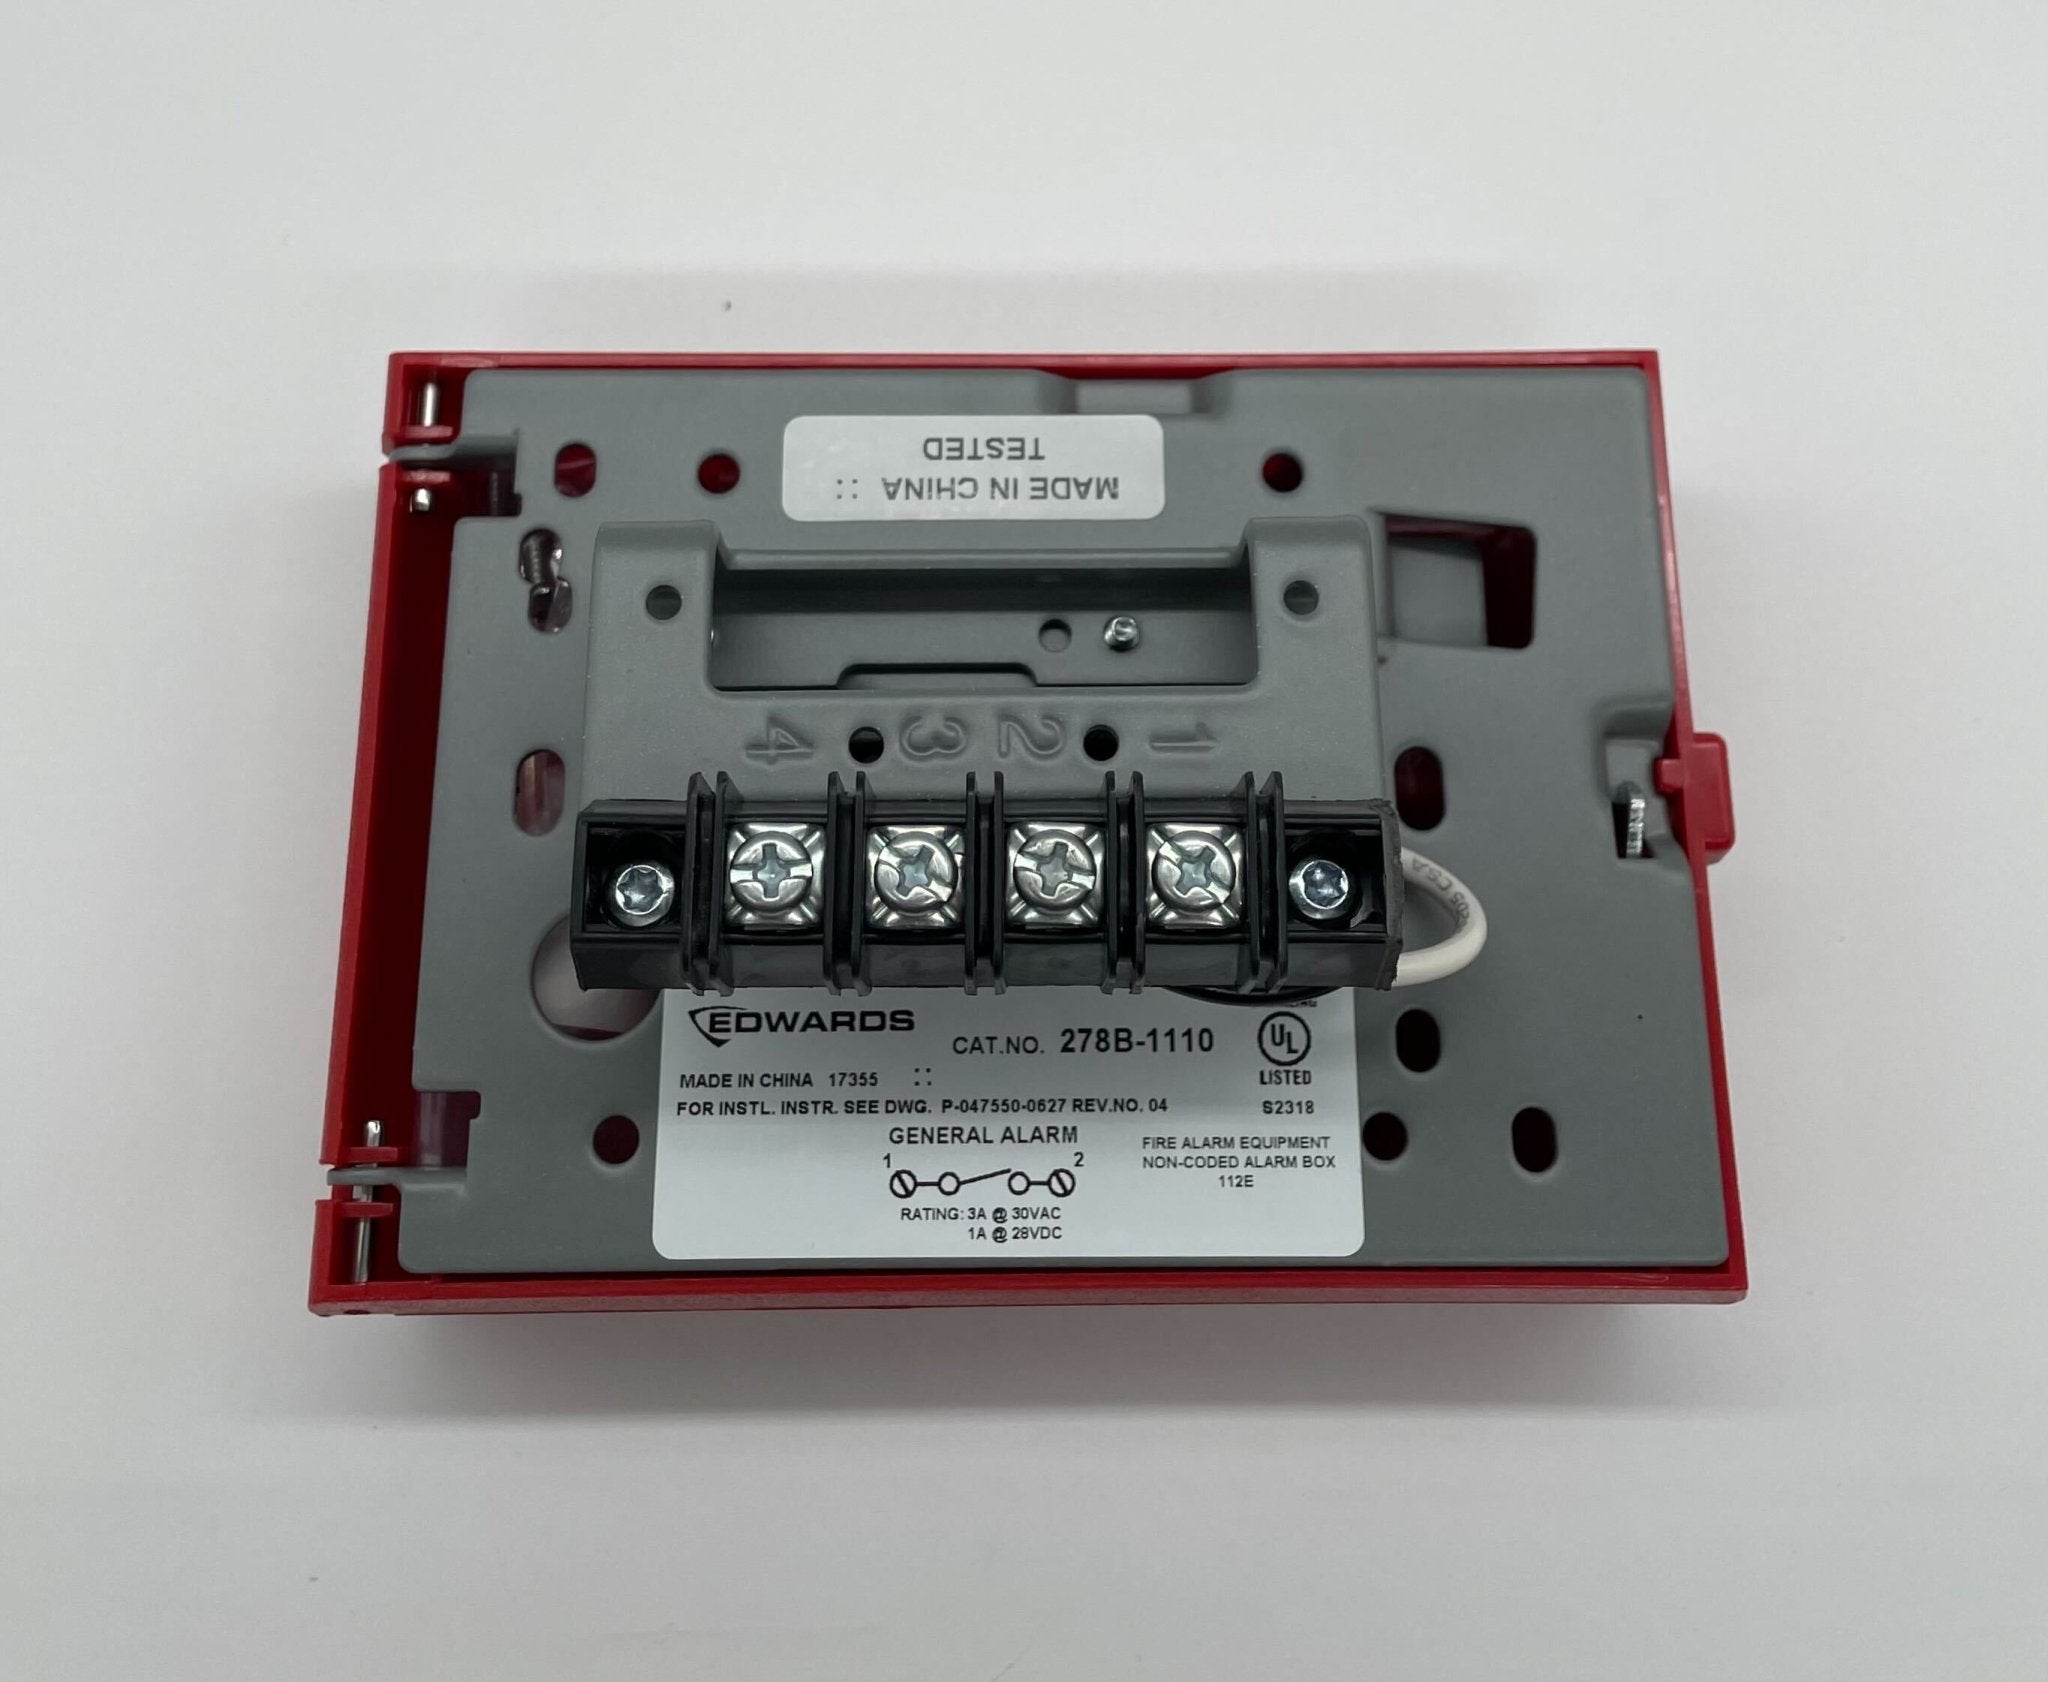 Edwards 278B-1110 - The Fire Alarm Supplier